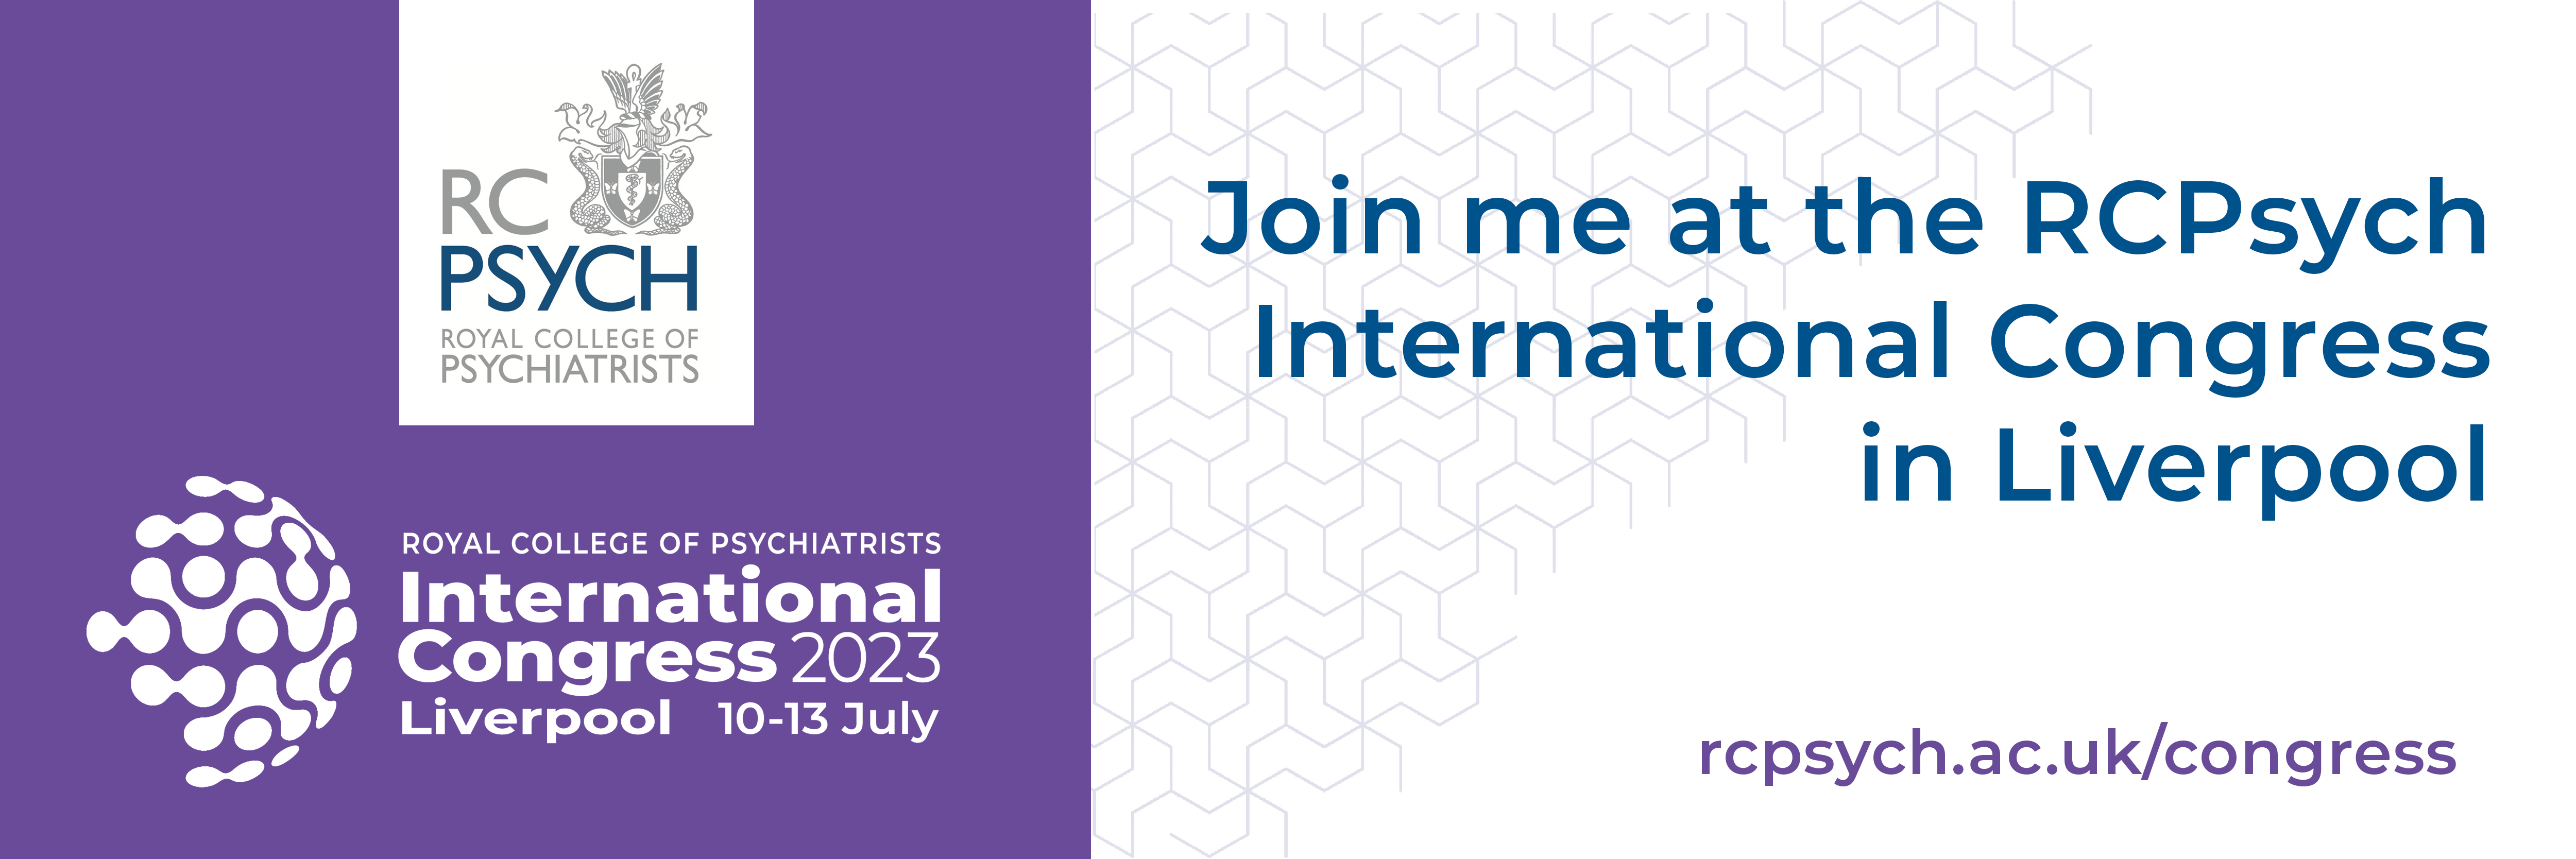 RCPsych International Congress 2023 email banner